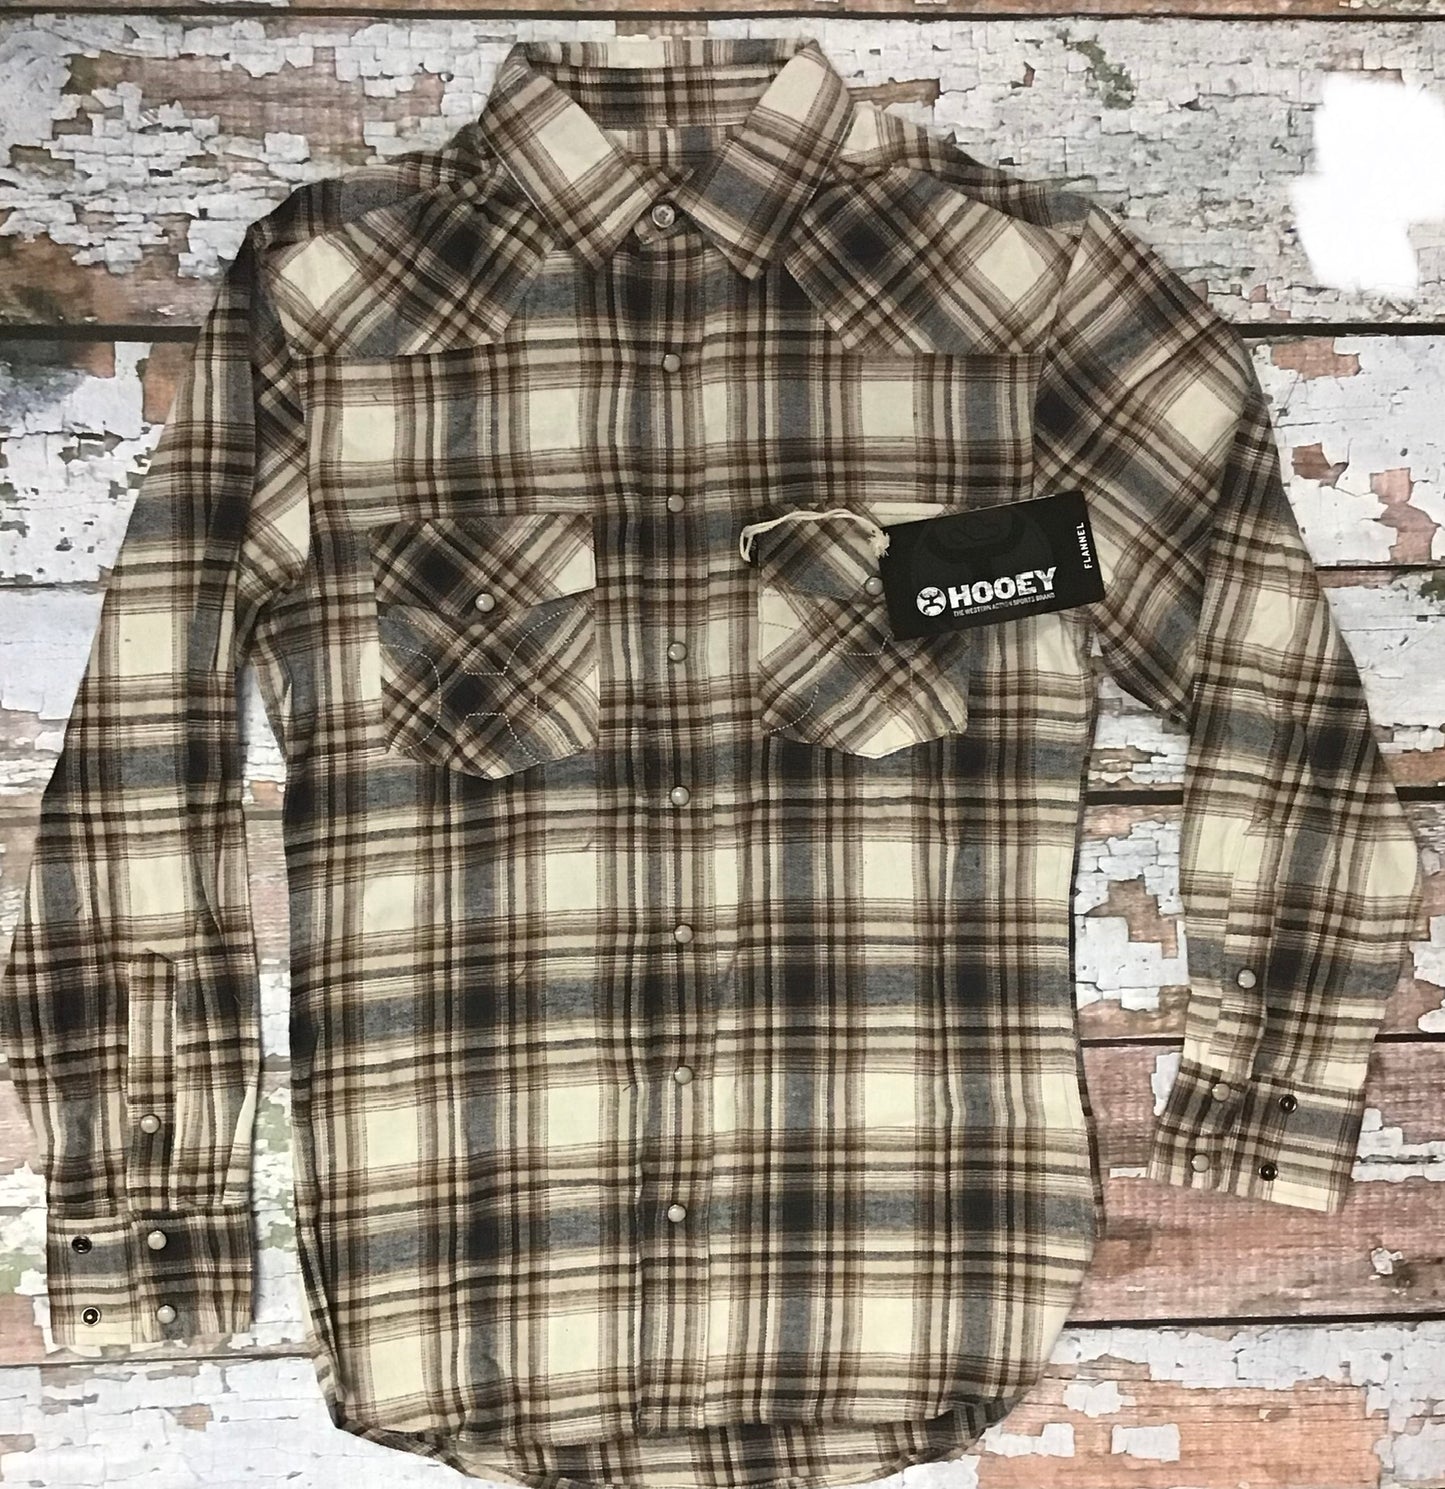 Outerwear Men’s Hooey Flannel with Pearl Snaps HF1002BKTN